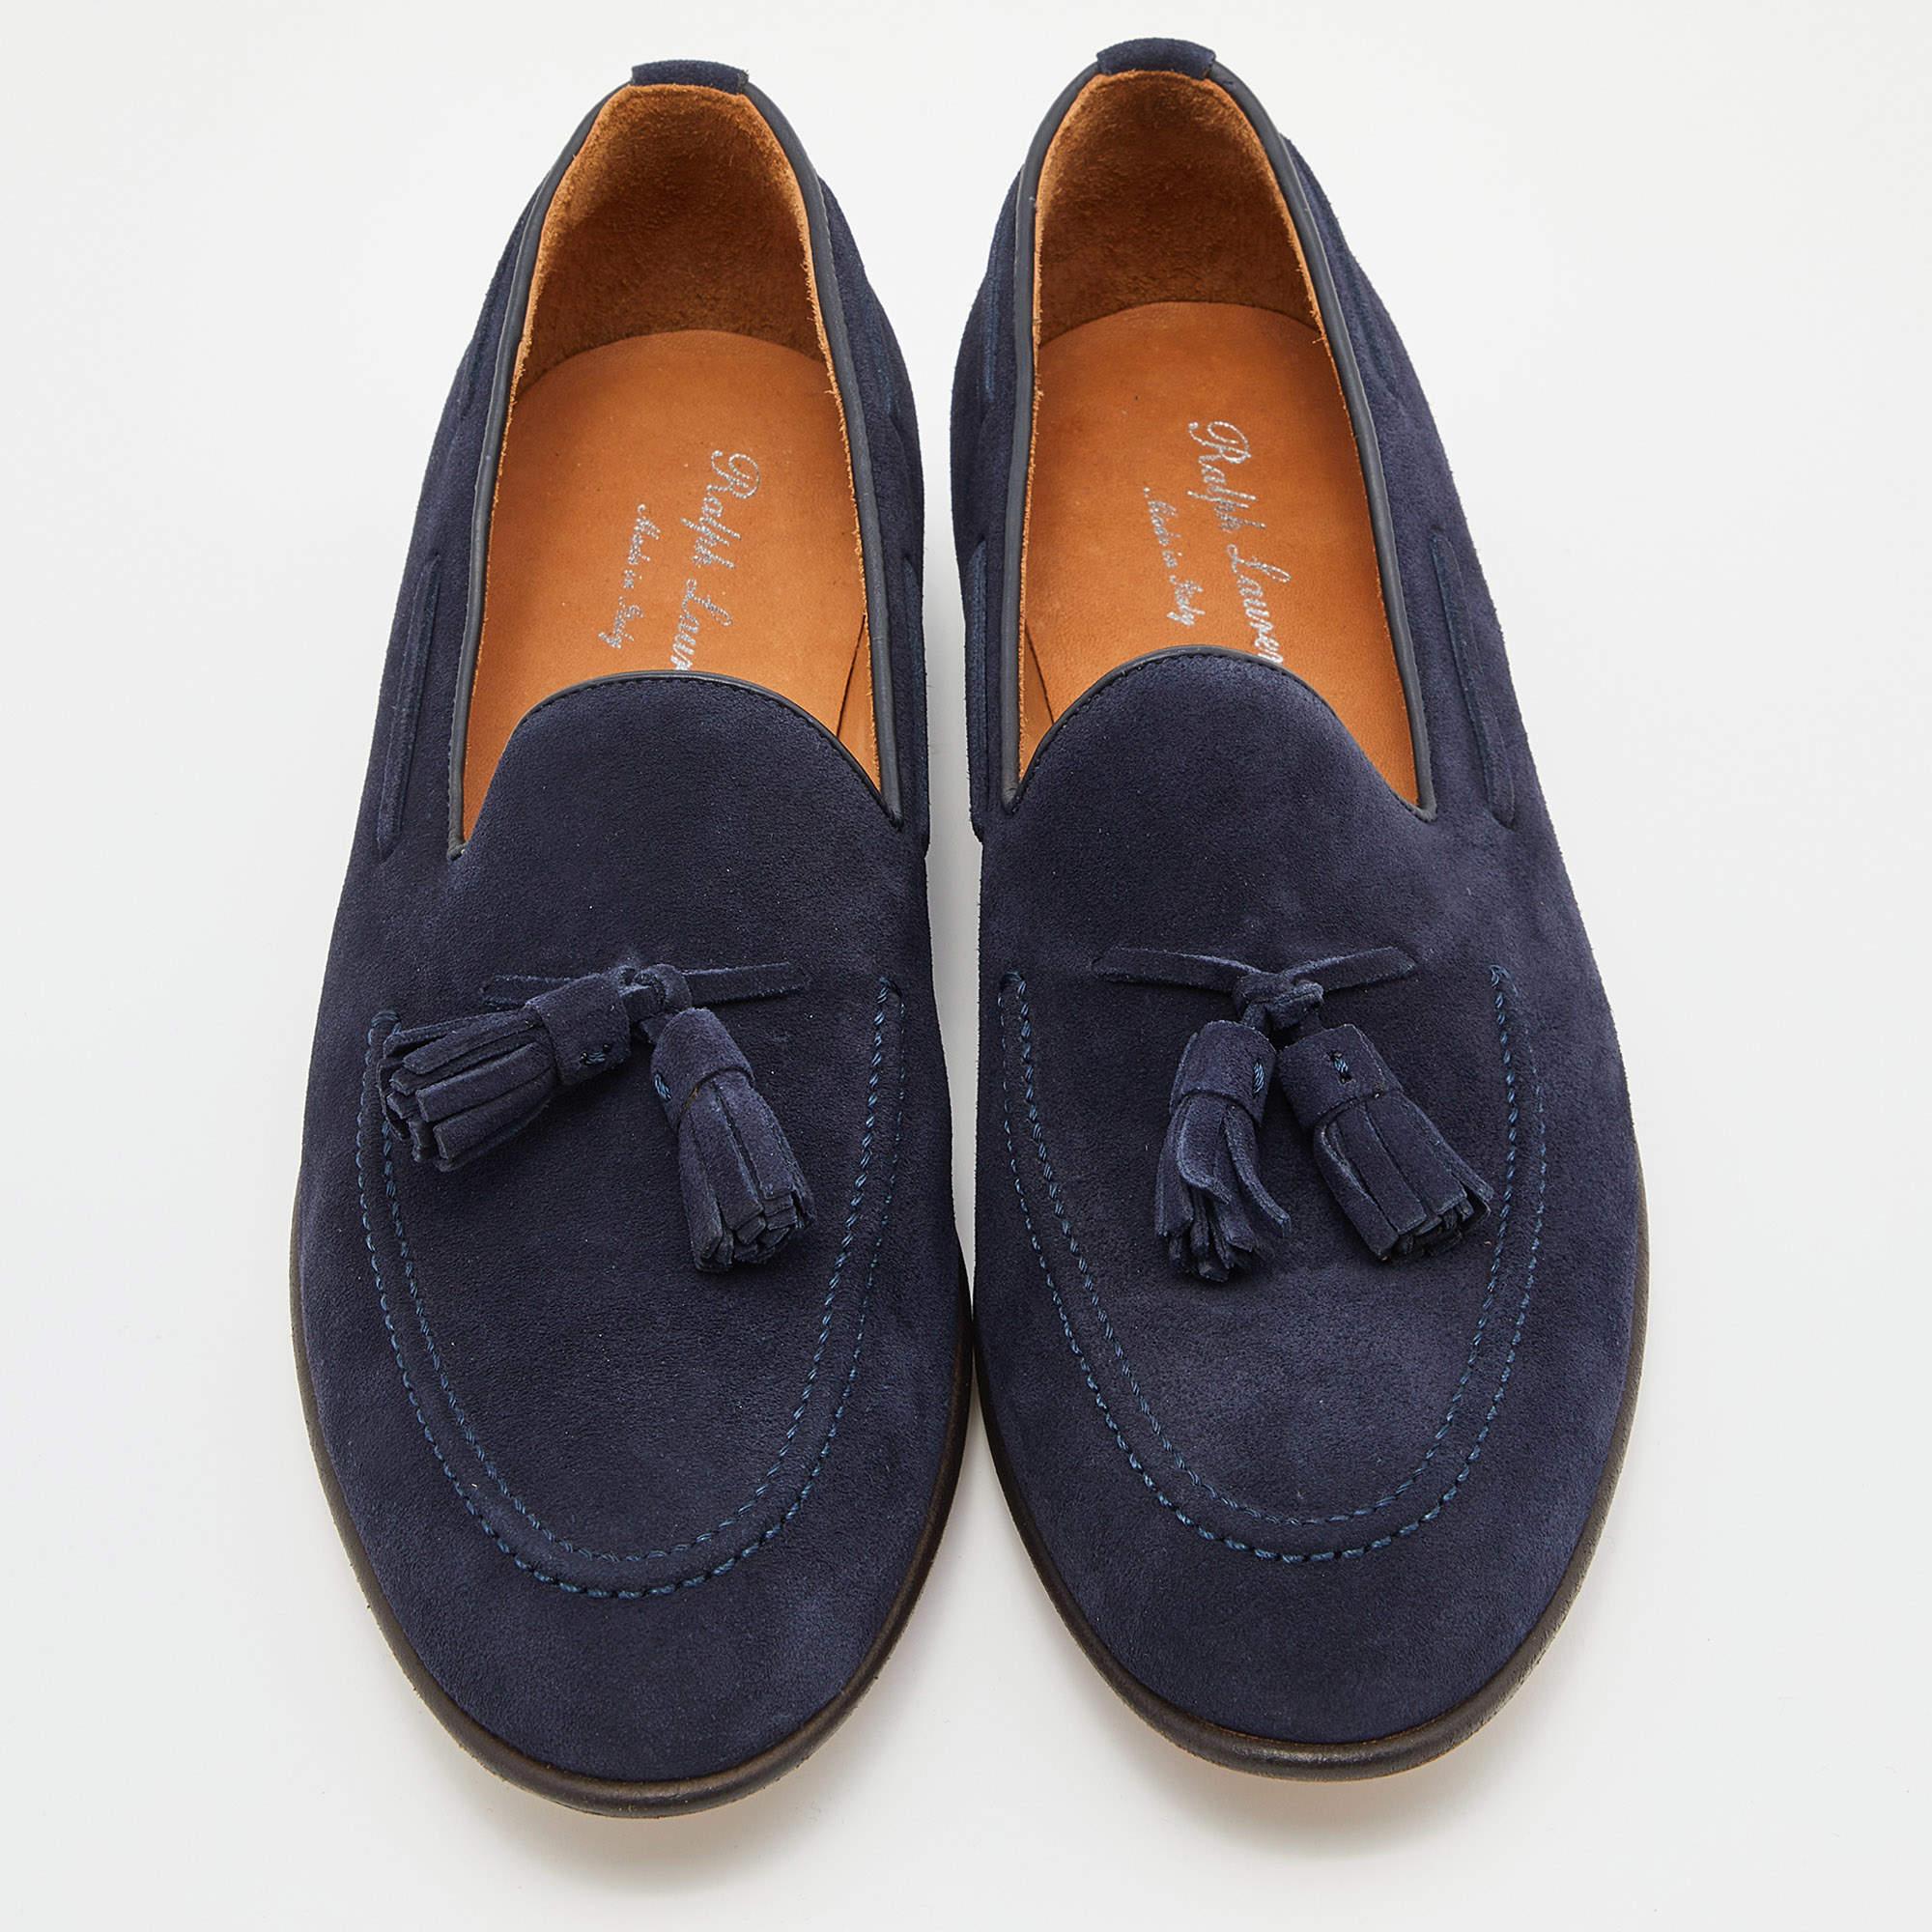 Let comfort and classic style be yours with these designer loafers from Ralph Lauren. Crafted in navy blue suede, the high-quality shoes have the perfect construction to take you through the day with utmost ease.

Includes: Original Dustbag,